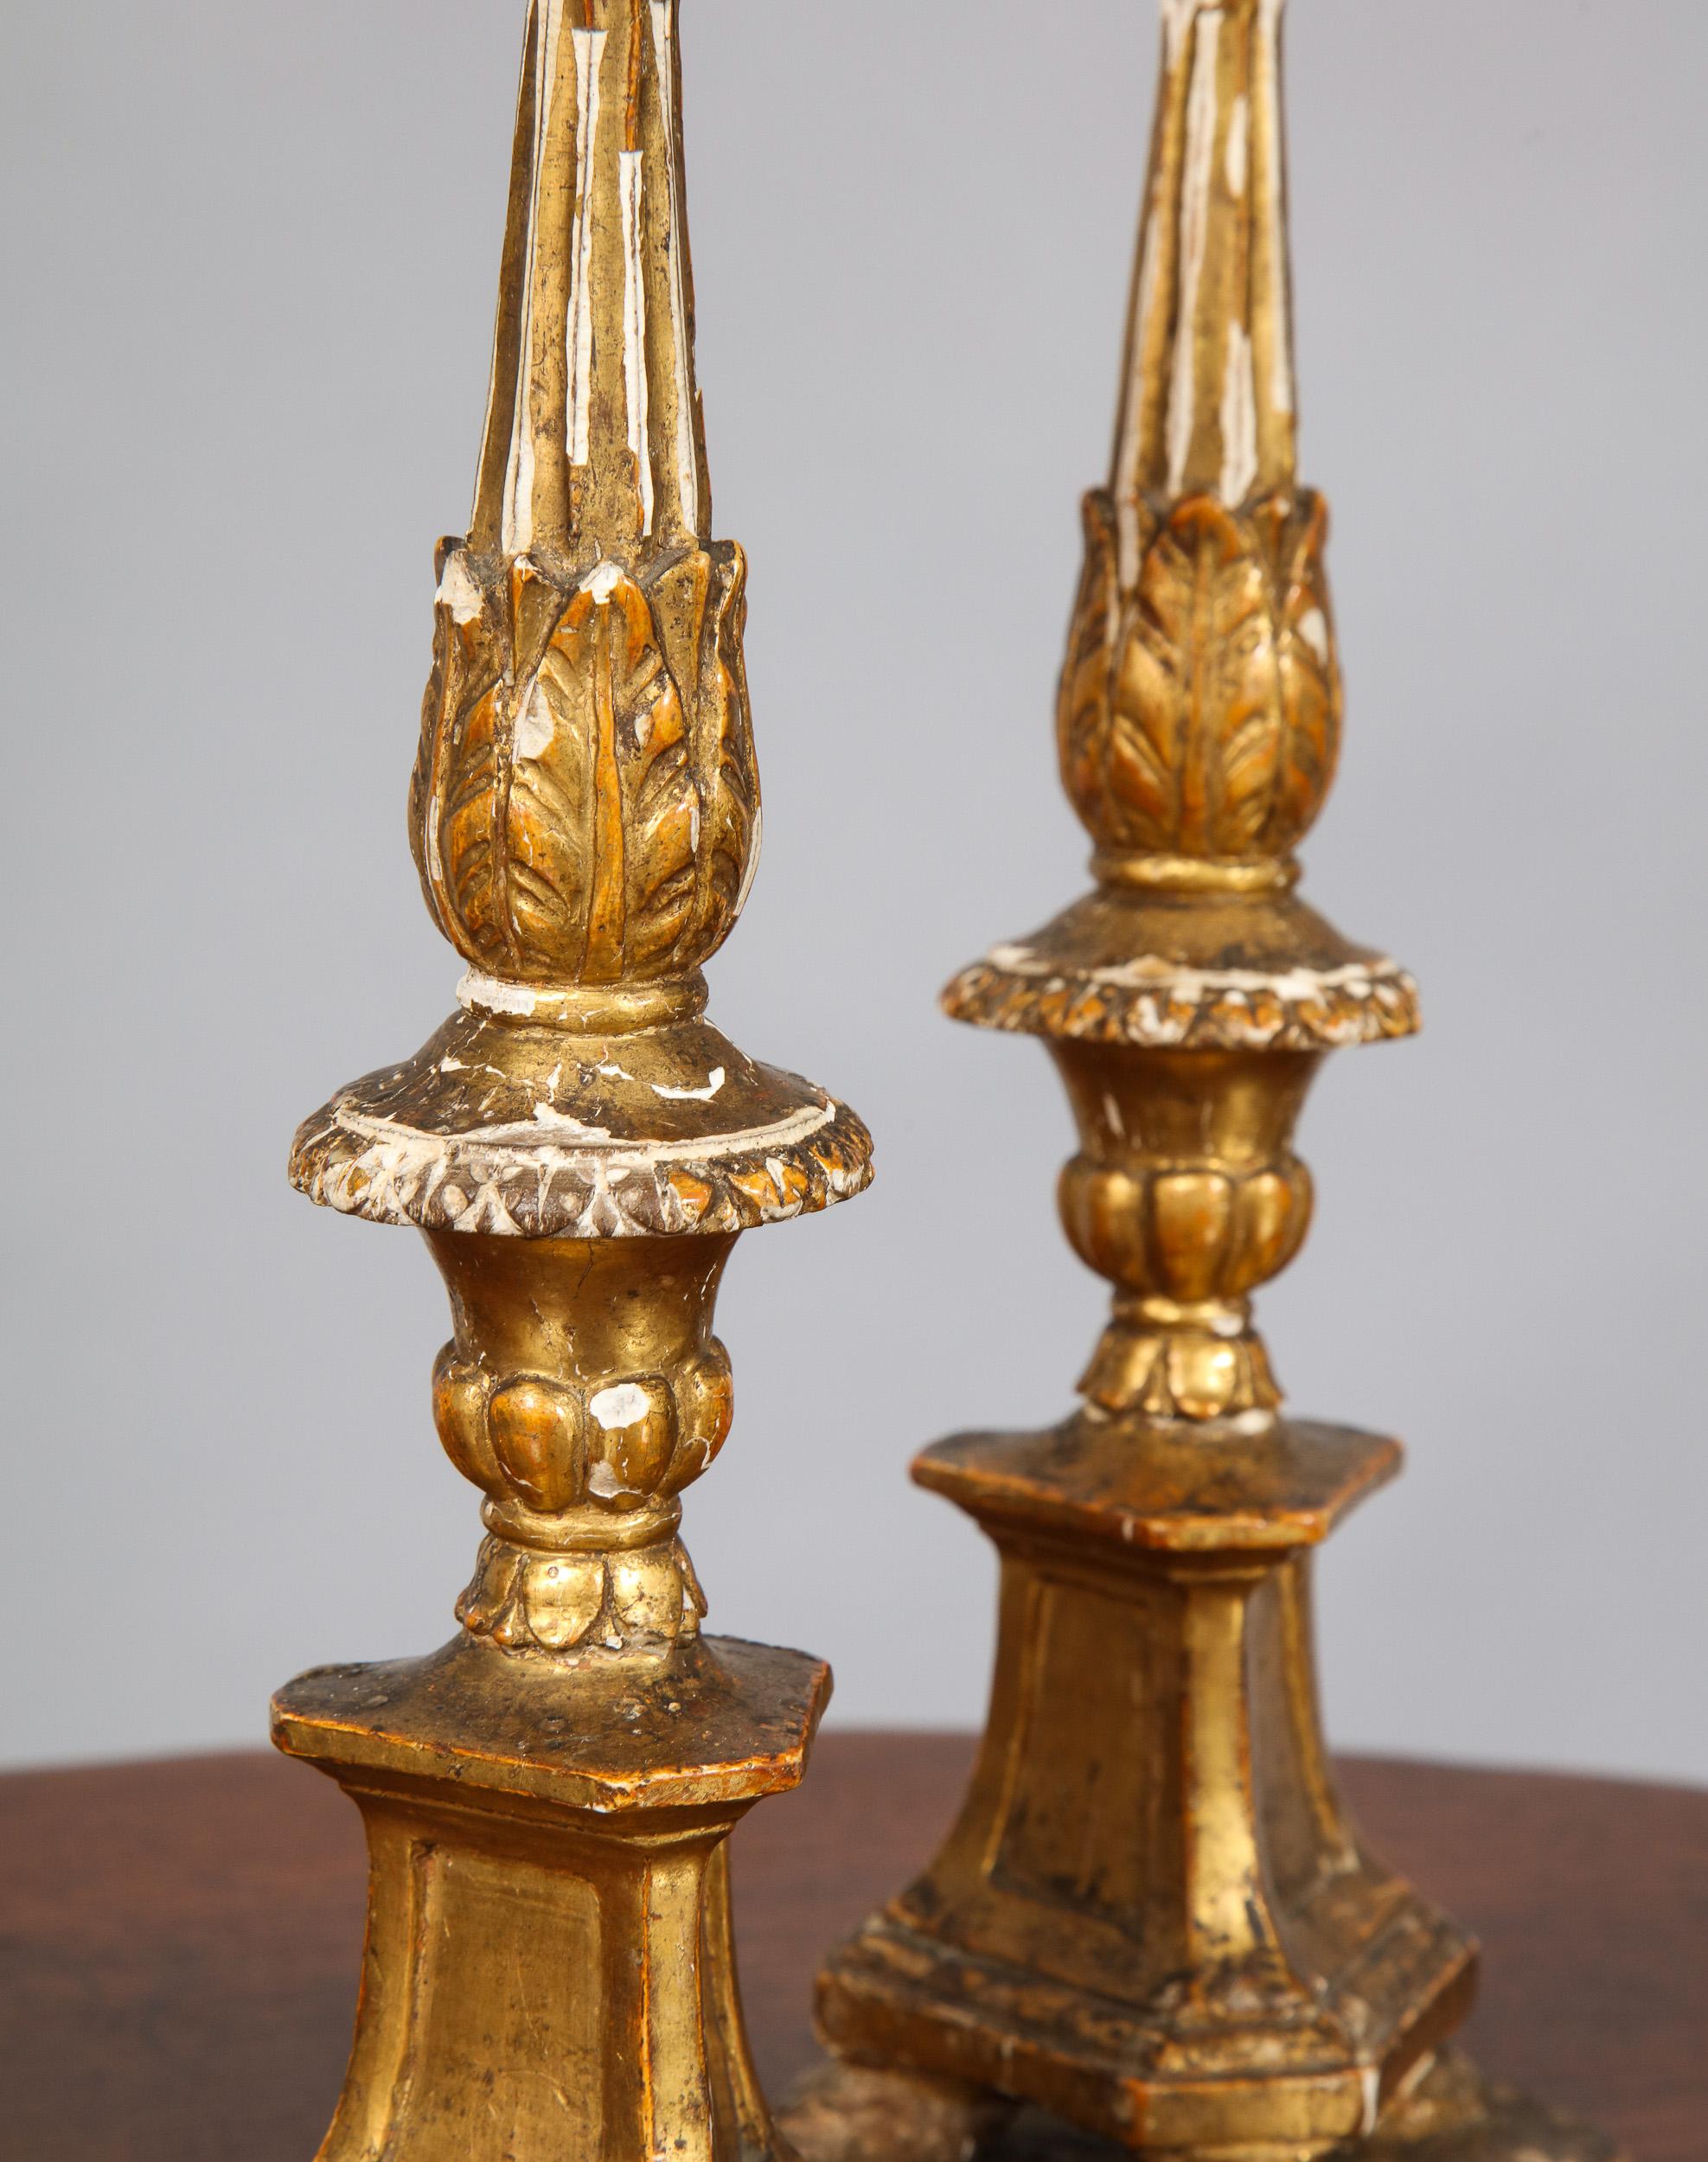 Pair of Diminutive Giltwood Pricket Candlesticks For Sale 1